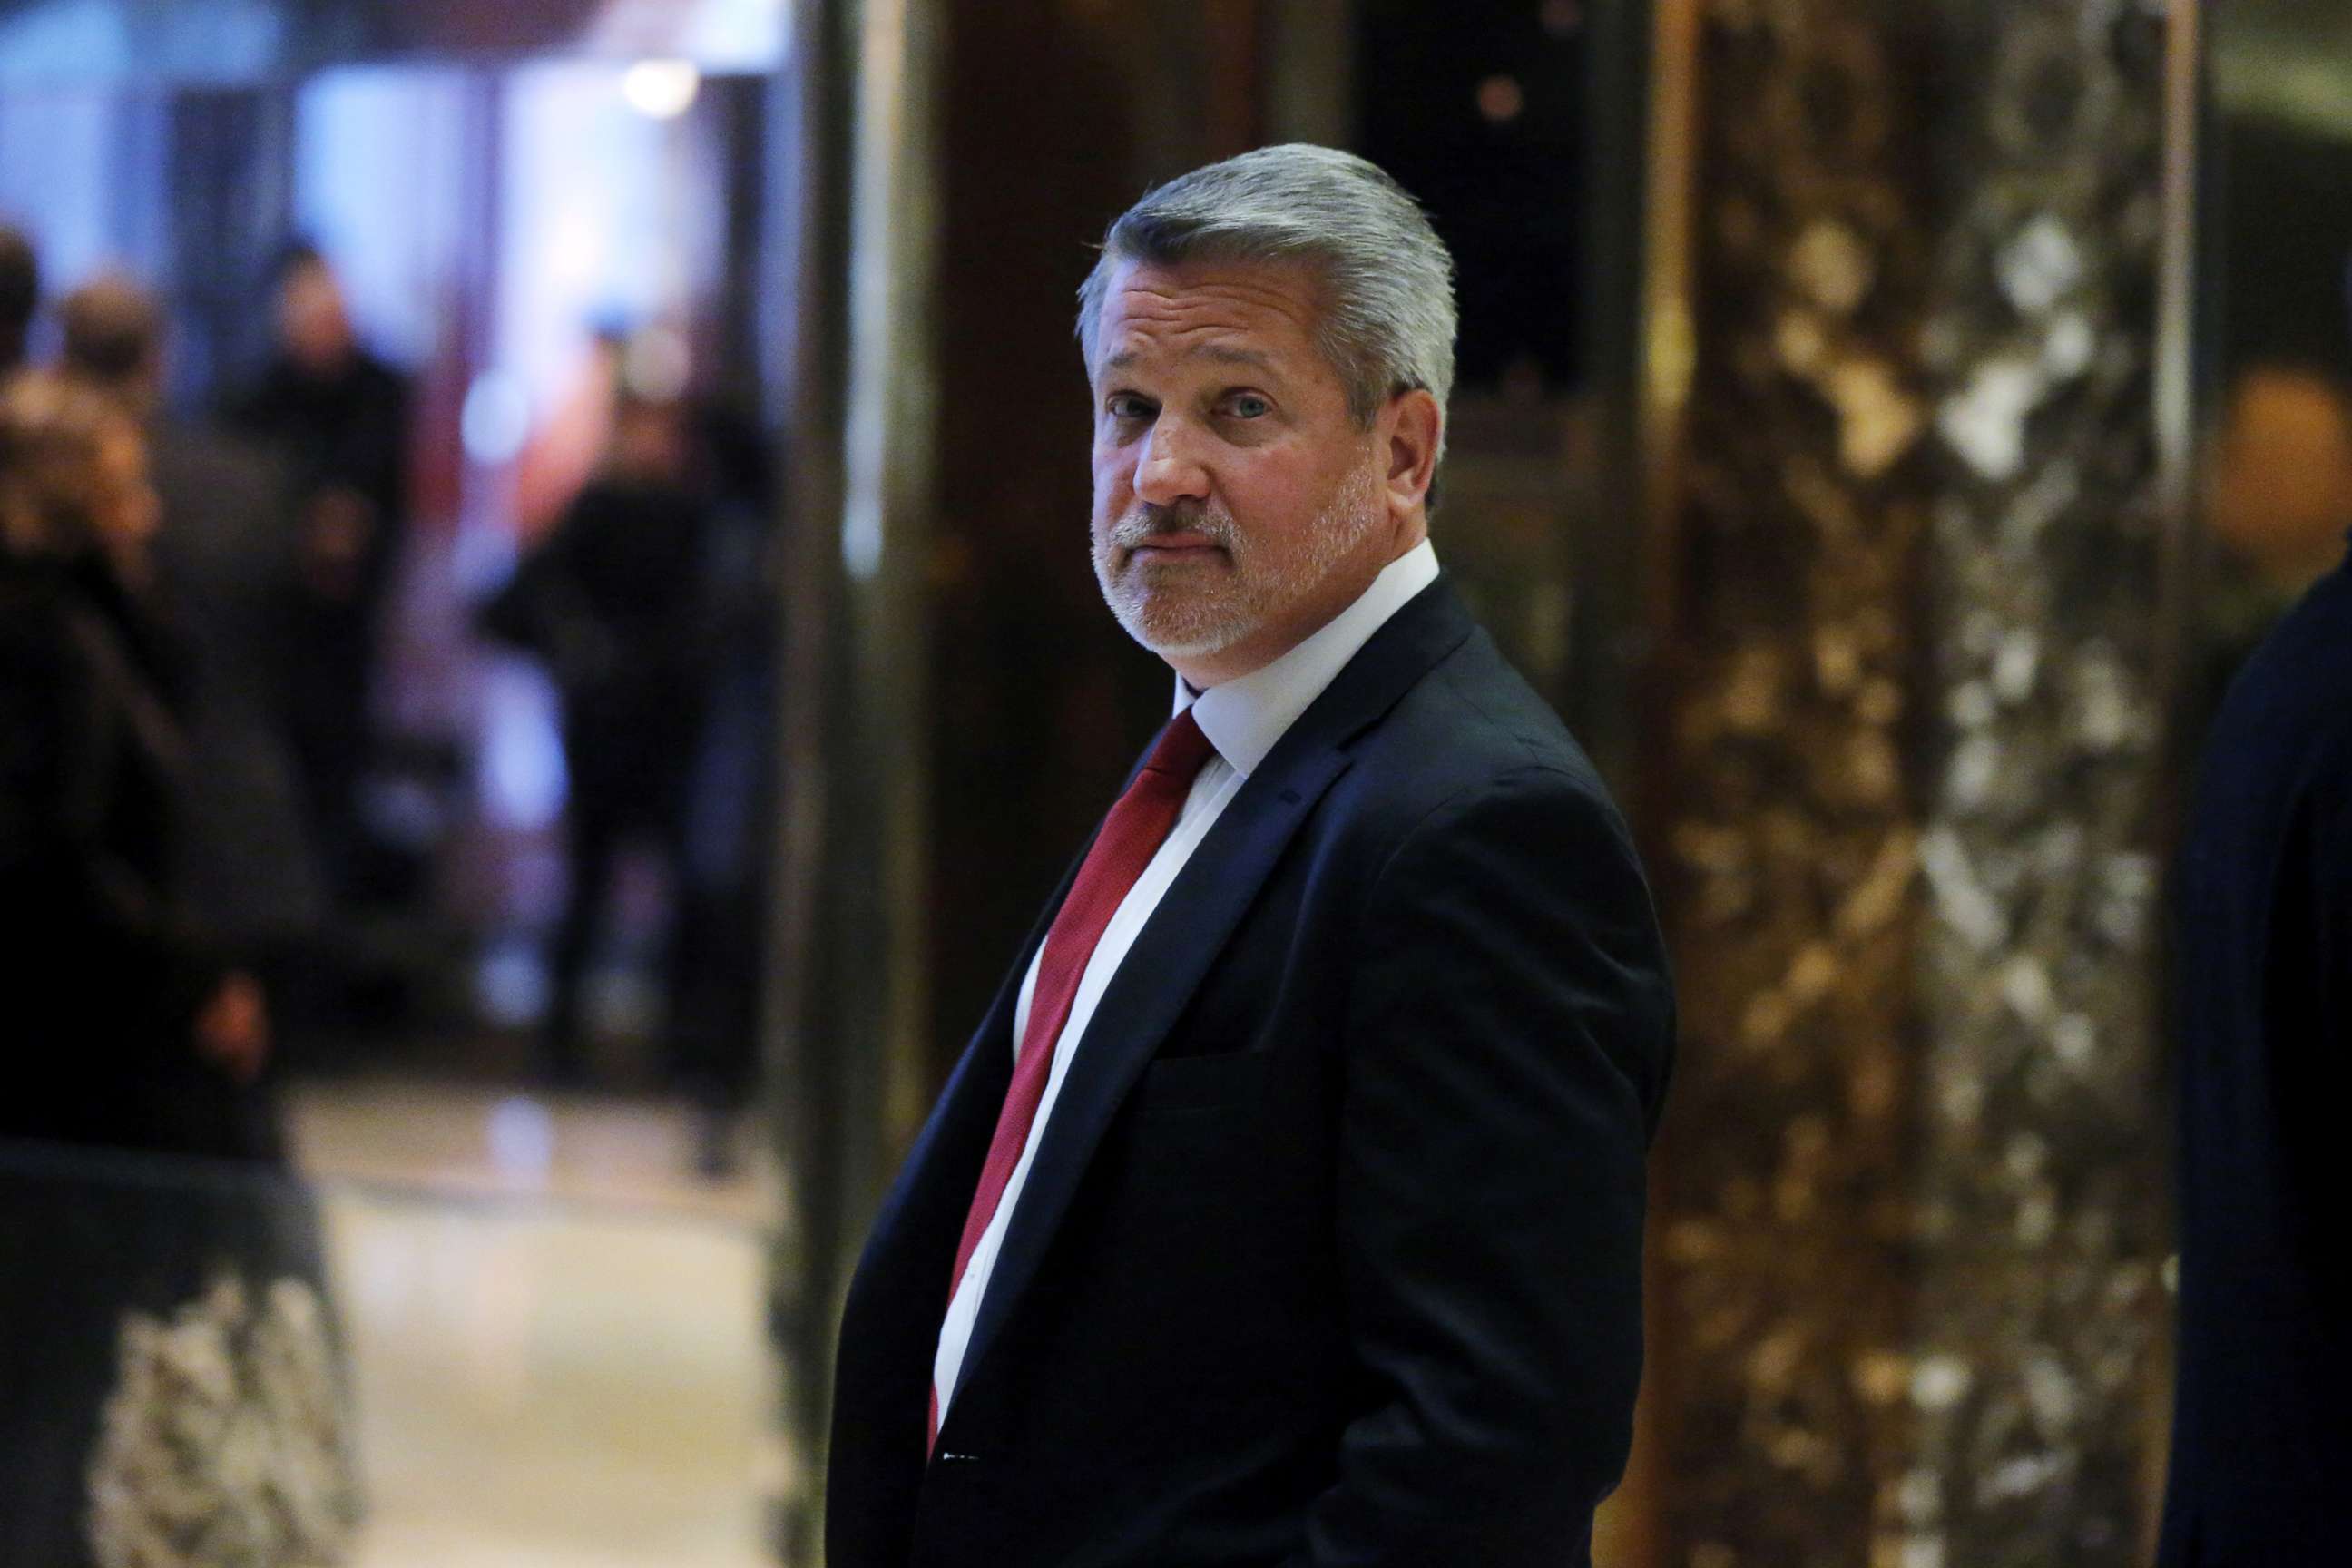 PHOTO: Bill Shine departs after meeting with President-elect Donald Trump at Trump Tower in New York, Nov. 21, 2016.